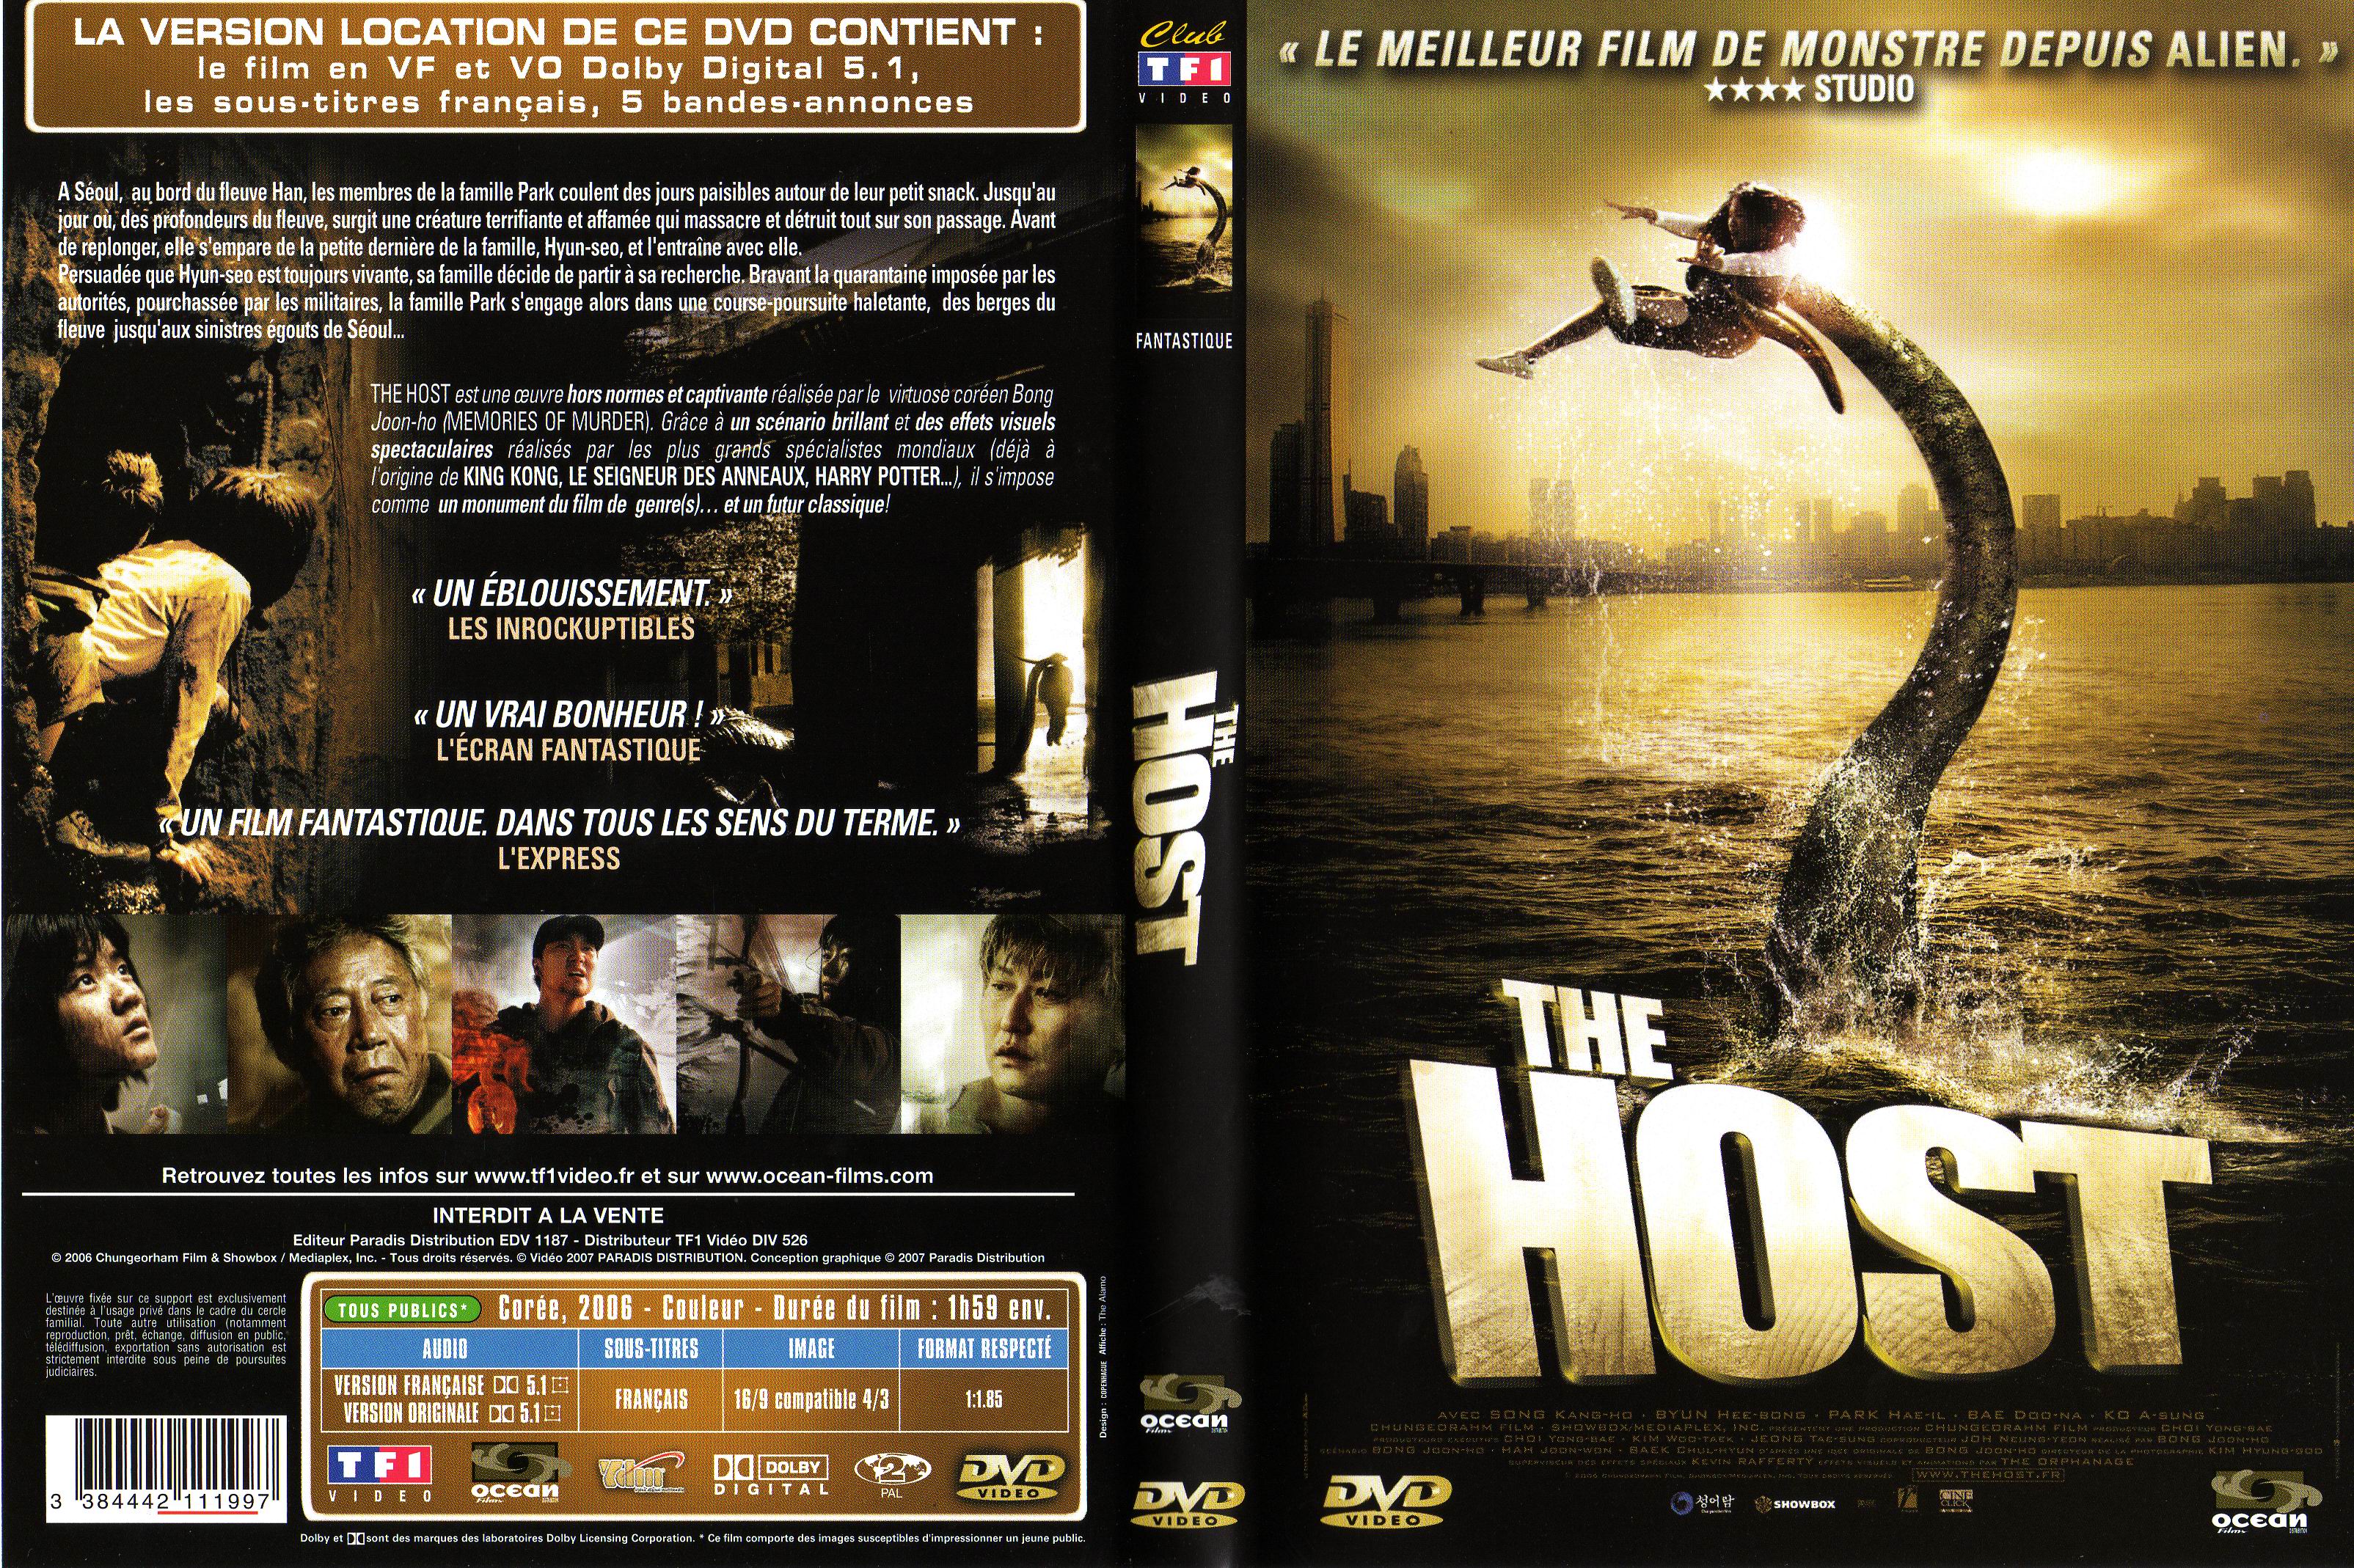 Jaquette DVD The host